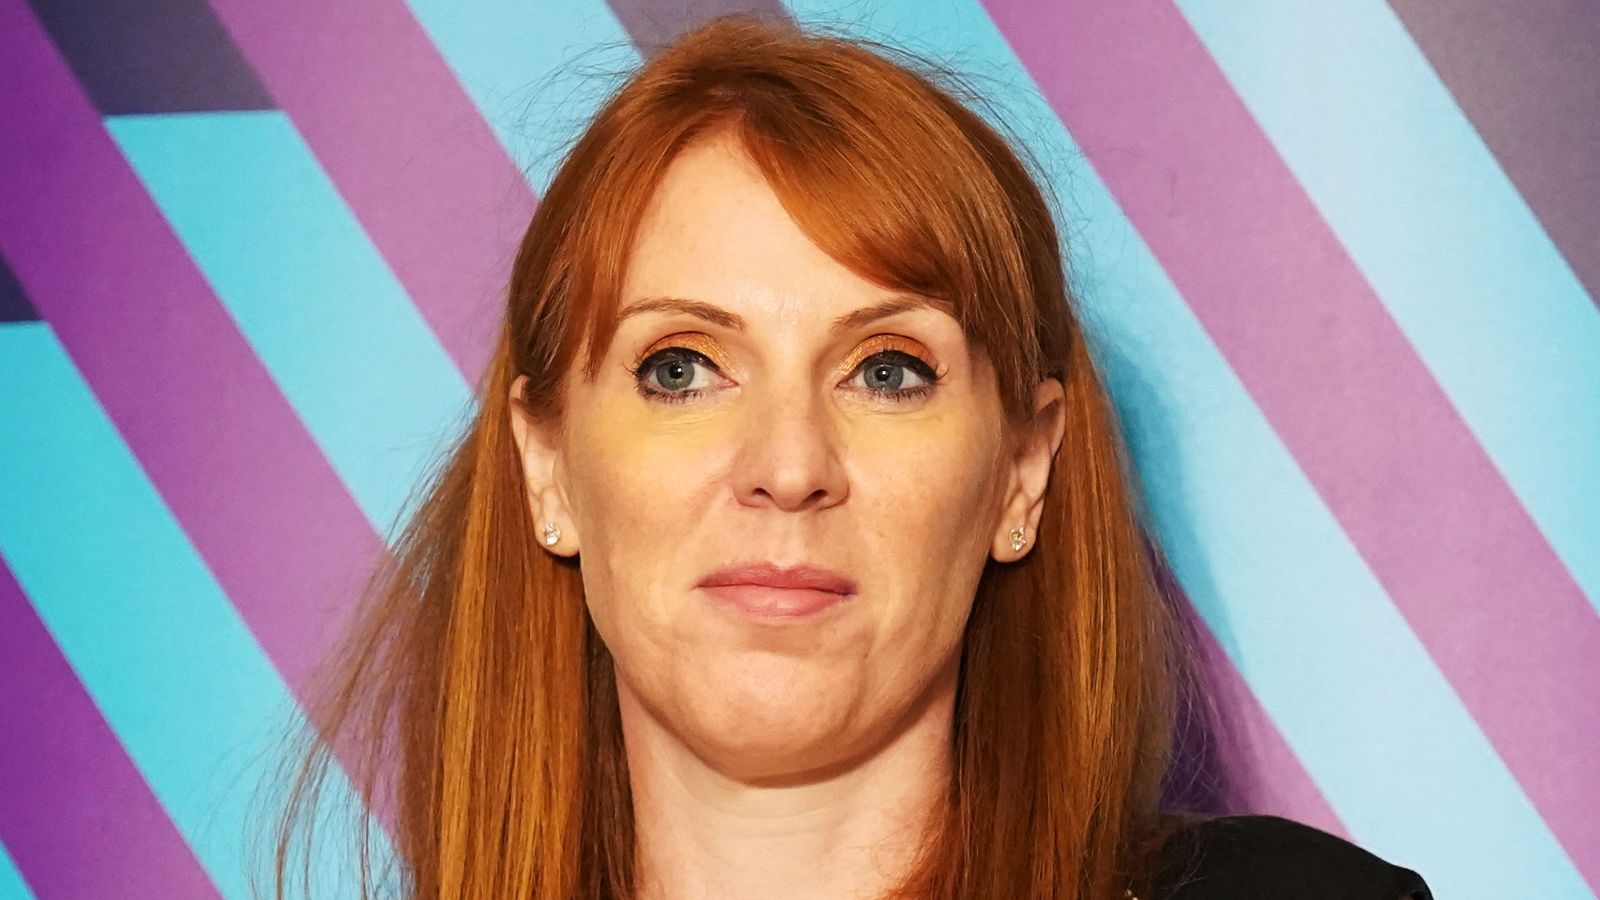 Angela Rayner says she will 'step down' if she is found to have committed a crime